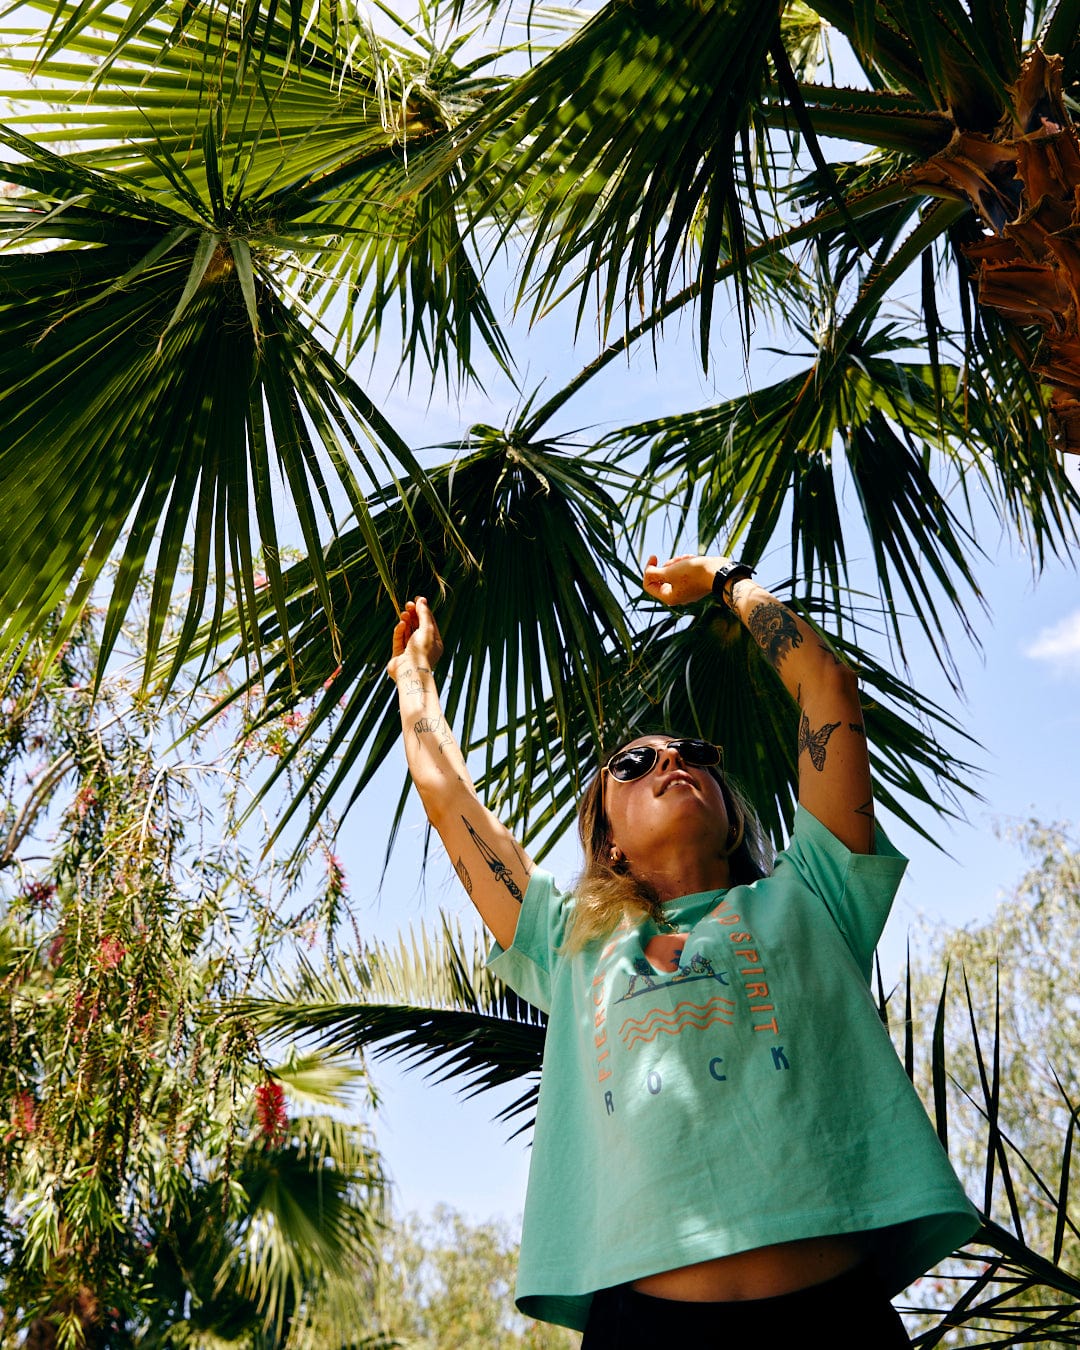 Woman reaching for a fruit on a palm tree, wearing sunglasses and a Saltrock Fierce Mind - Womens Boxy T-Shirt in Green with wild spirit graphics, under a blue sky.